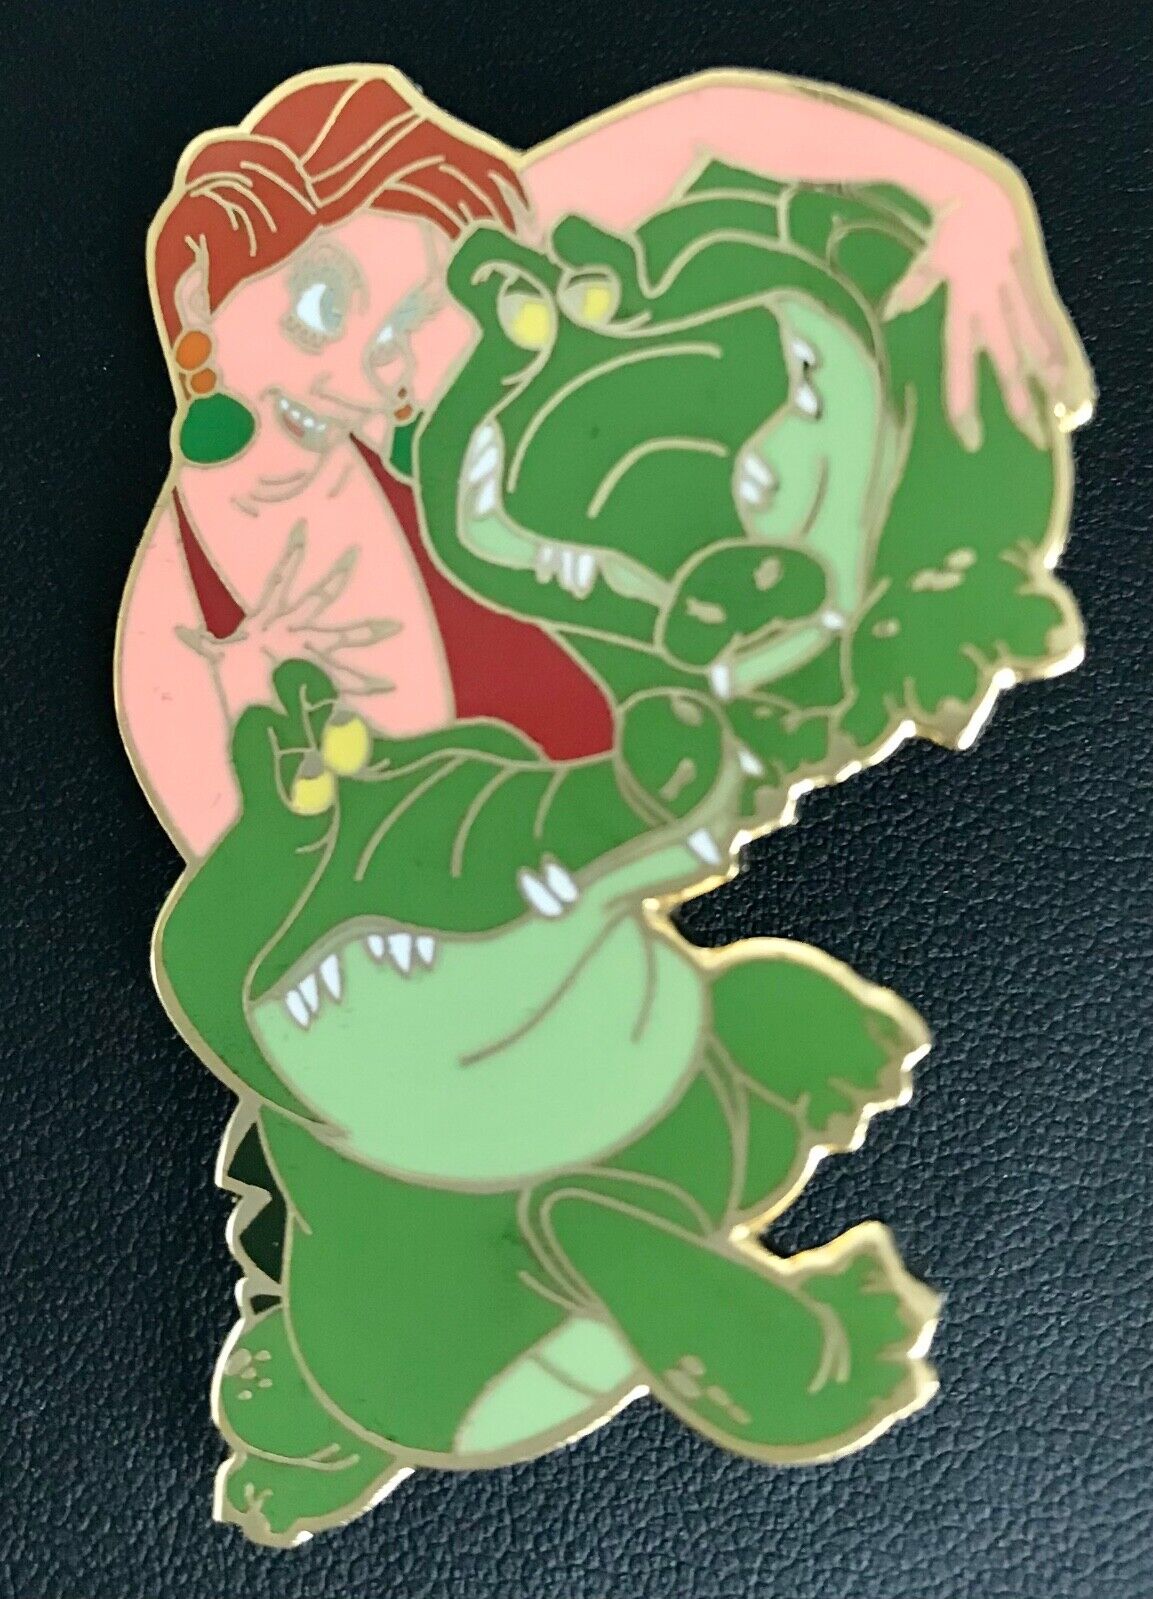 LTD ED /250 MADAME MEDUSA with BRUTUS and NERO pin from The Rescuers. BRAND NEW